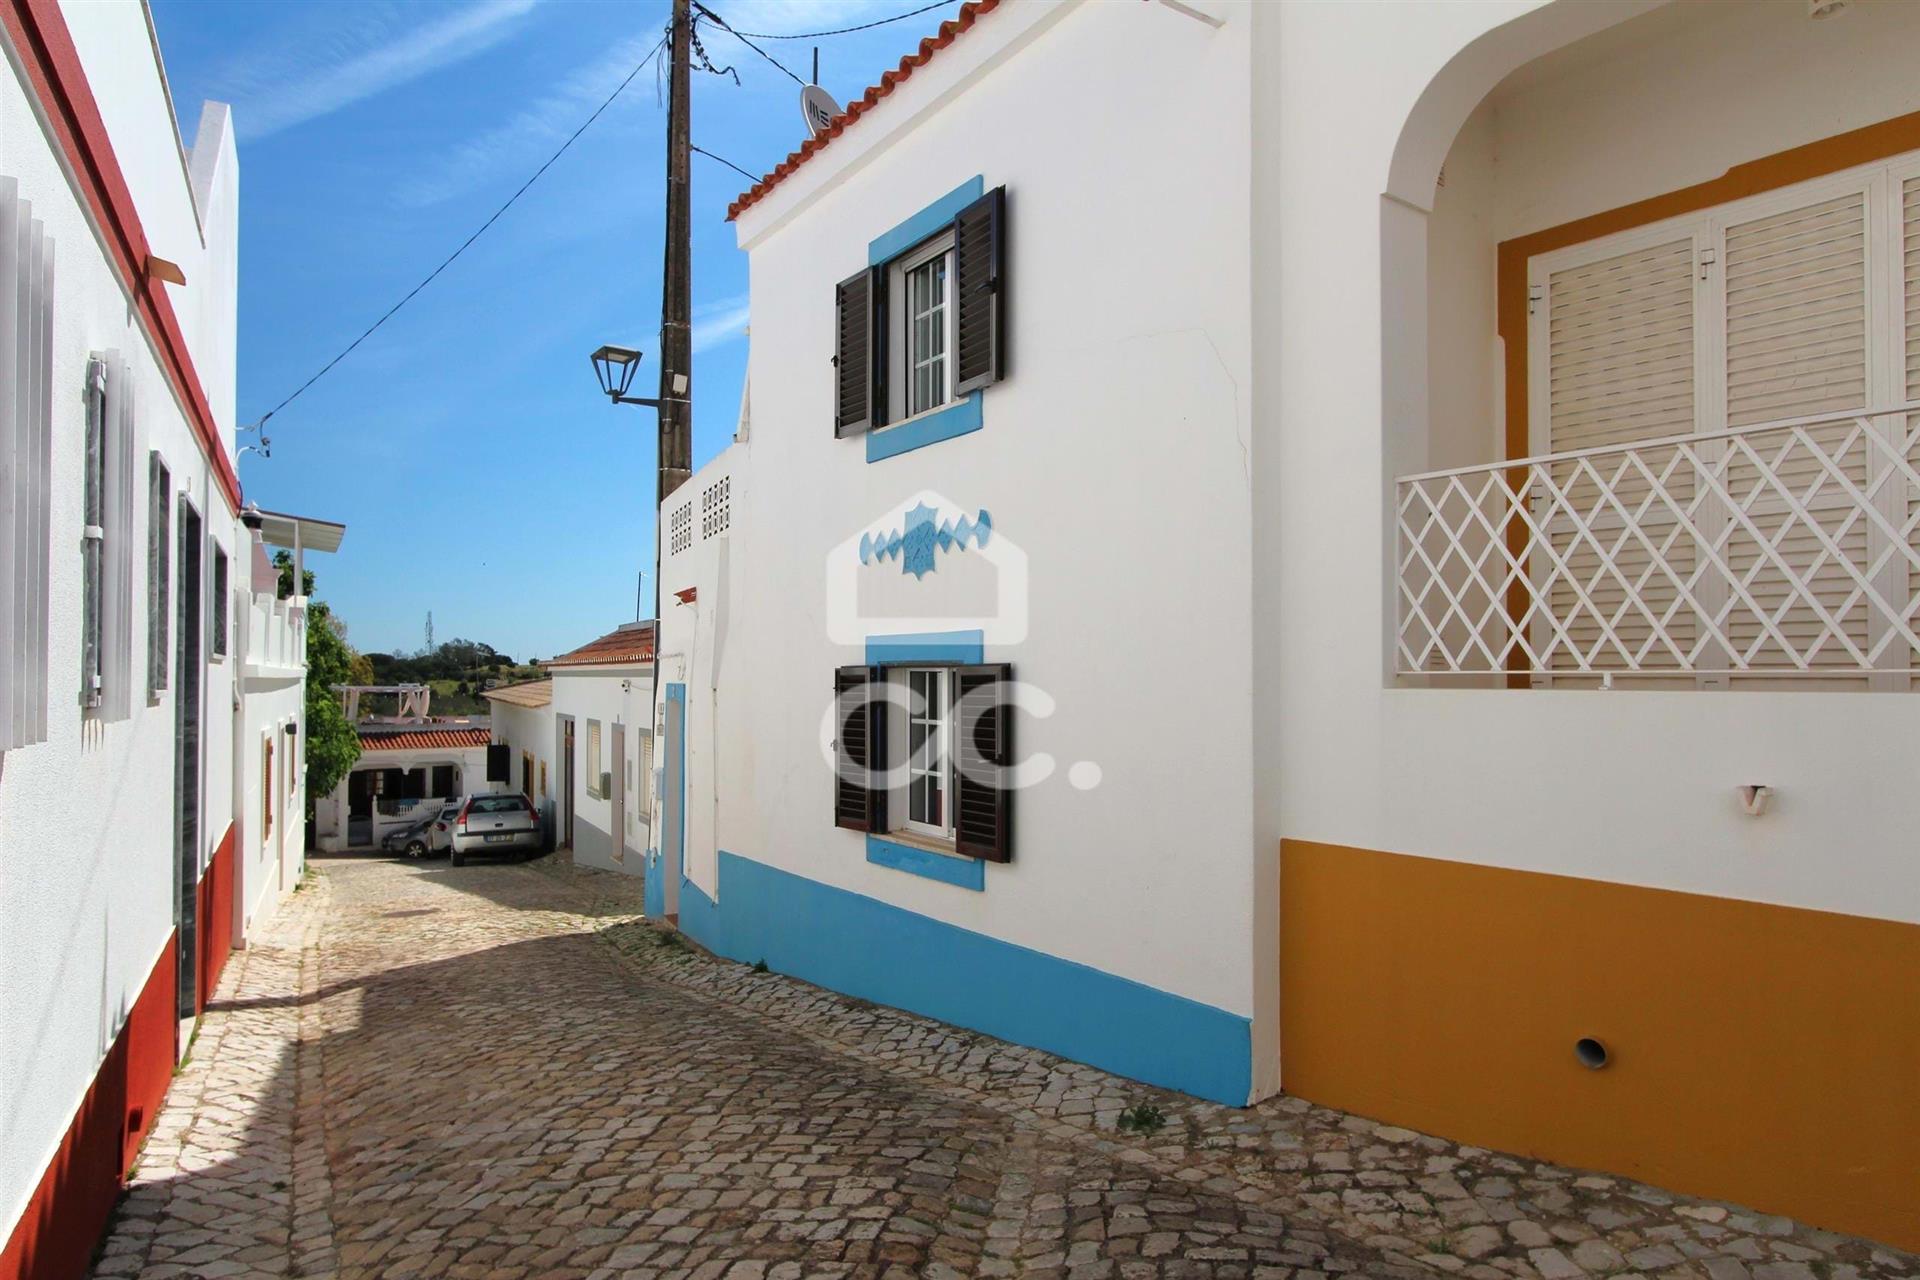 Be enchanted by this typical Algarve villa in Porches!